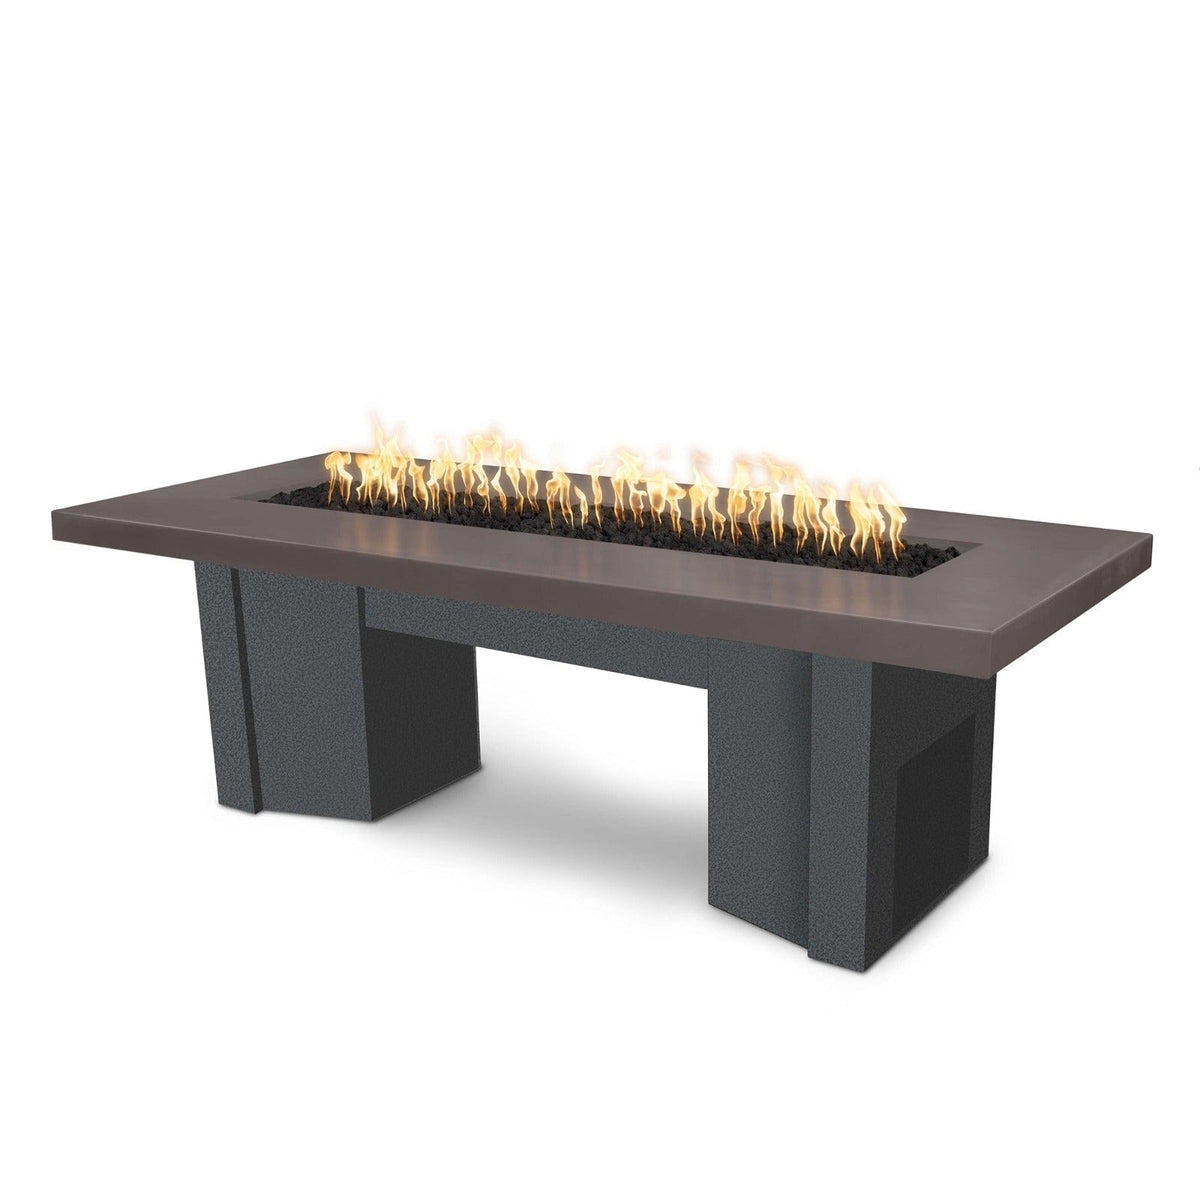 The Outdoor Plus Fire Features Chestnut (-CST) / Silver Vein Powder Coated Steel (-SLV) The Outdoor Plus 60&quot; Alameda Fire Table Smooth Concrete in Liquid Propane - Match Lit with Flame Sense System / OPT-ALMGFRC60FSML-LP